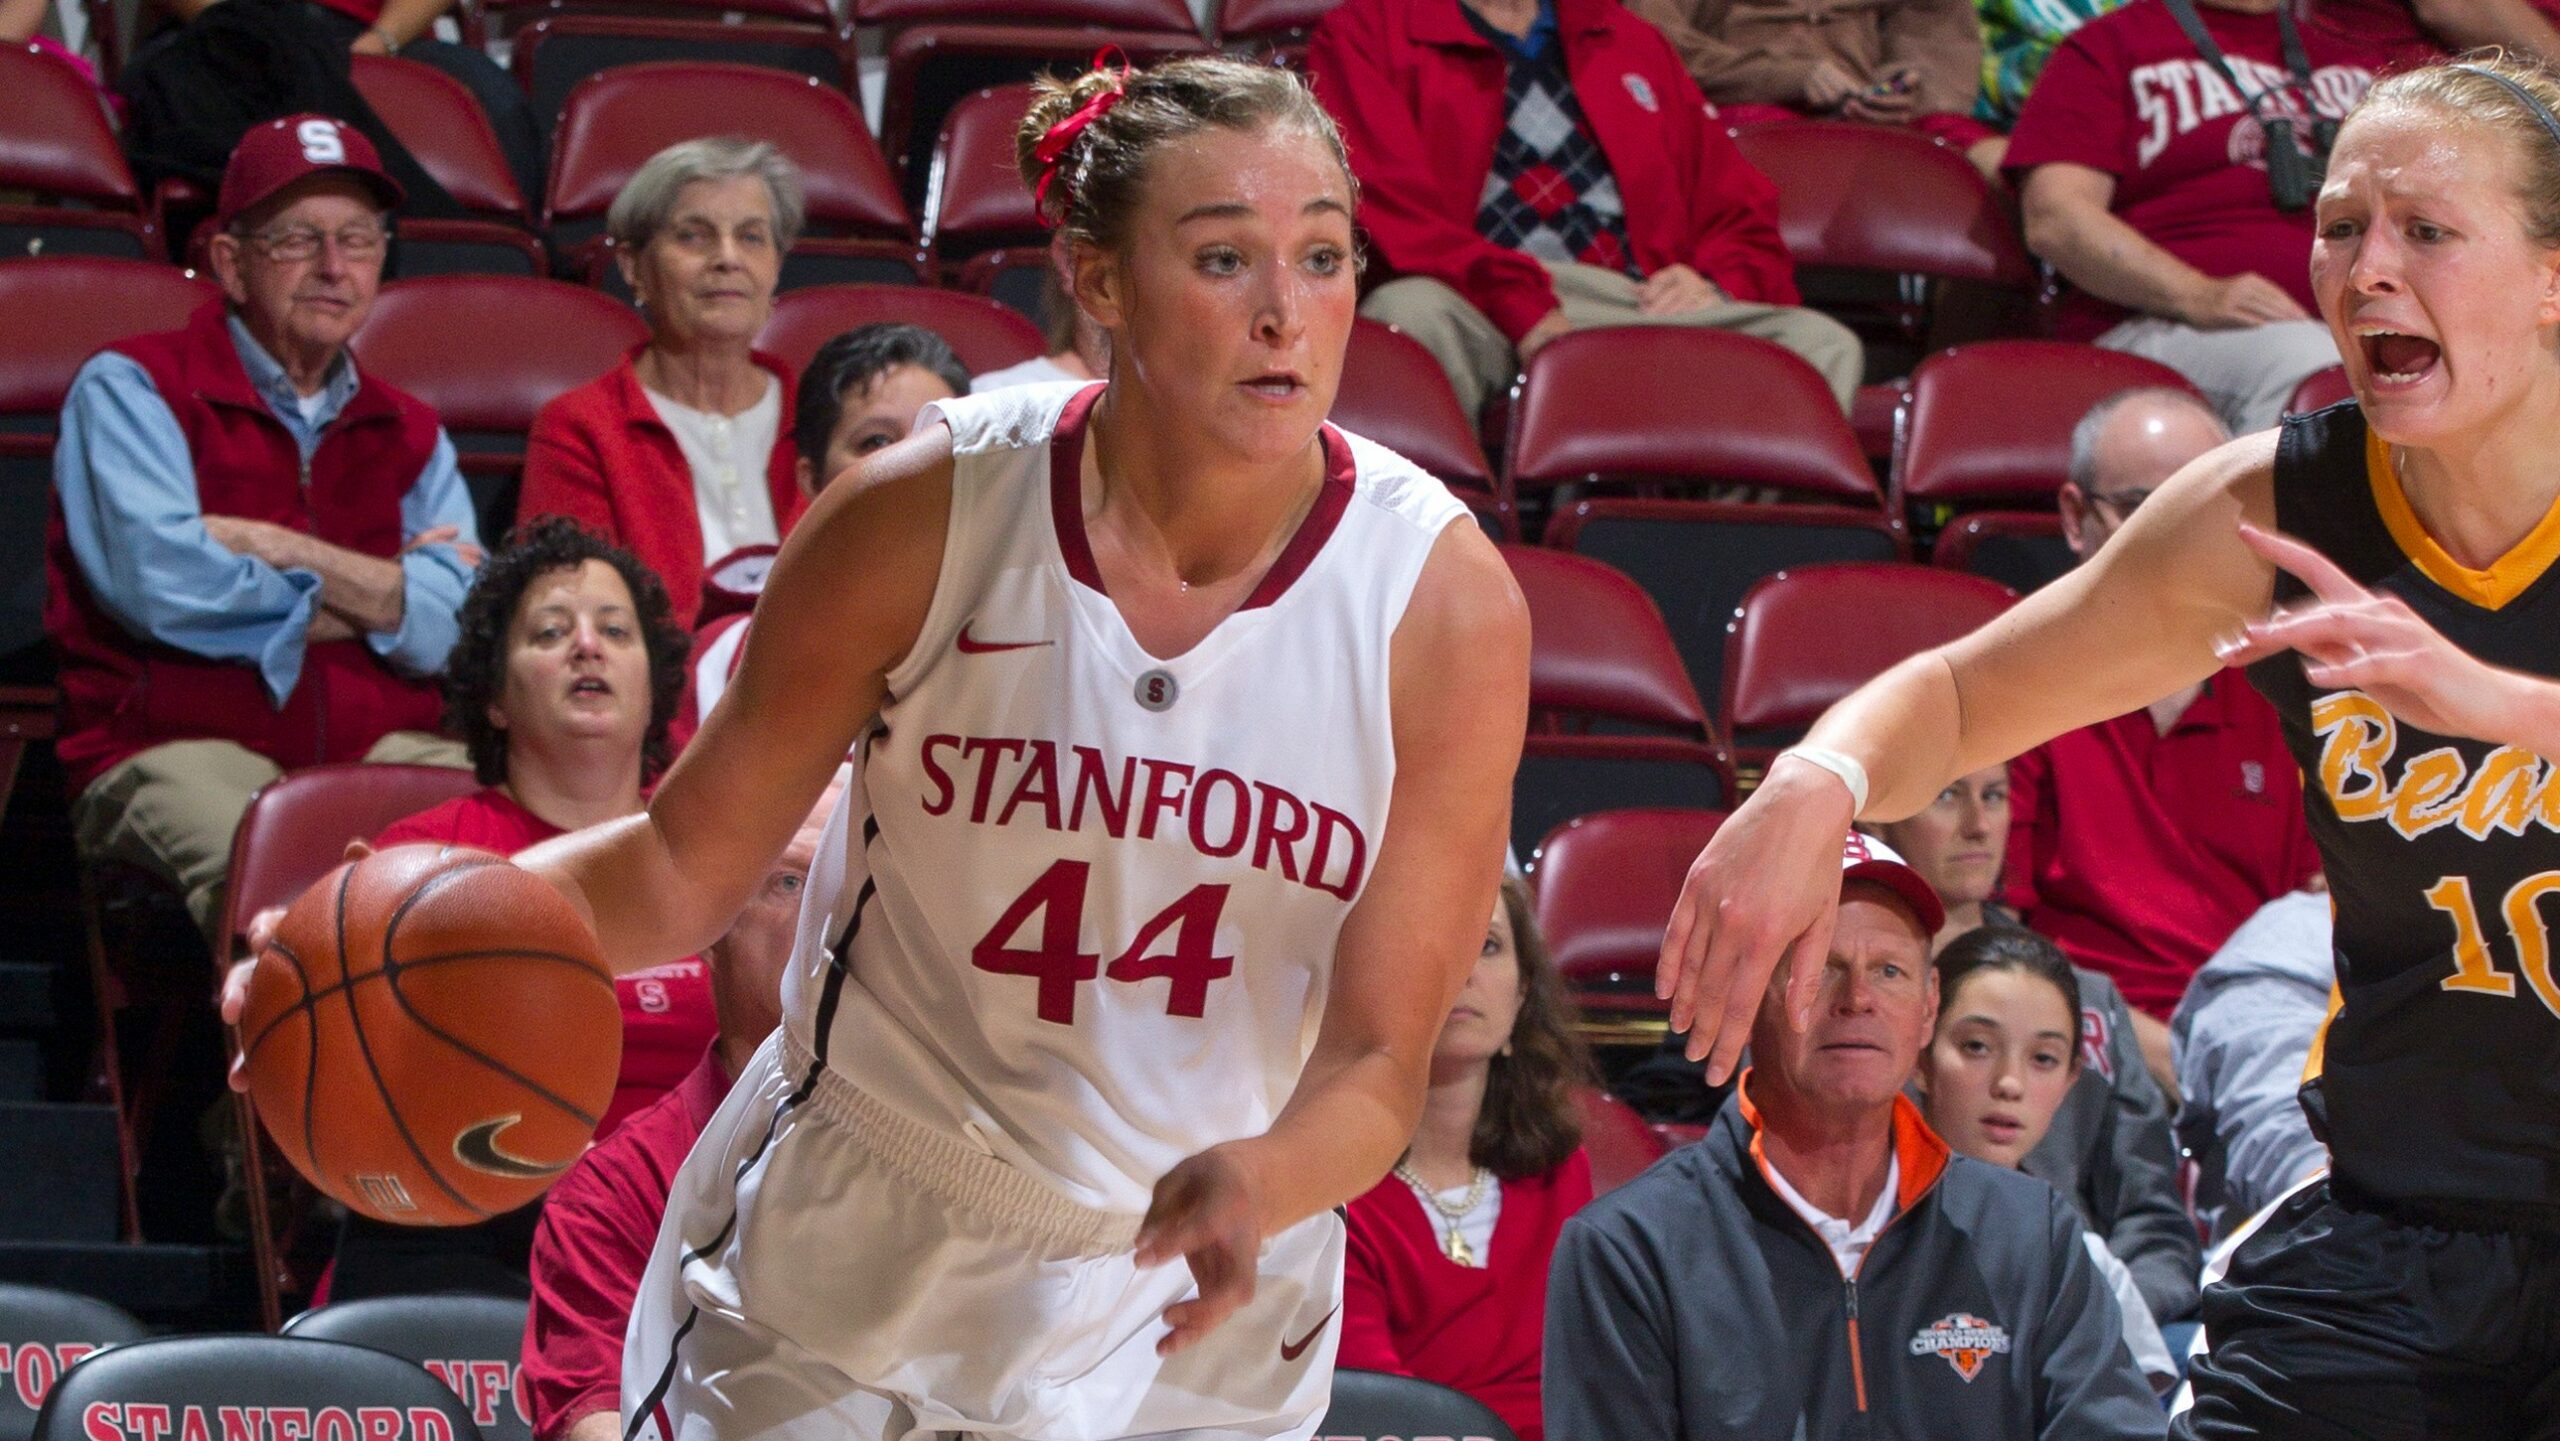 Seattle Storm signs former Stanford player Joslyn Tinkle